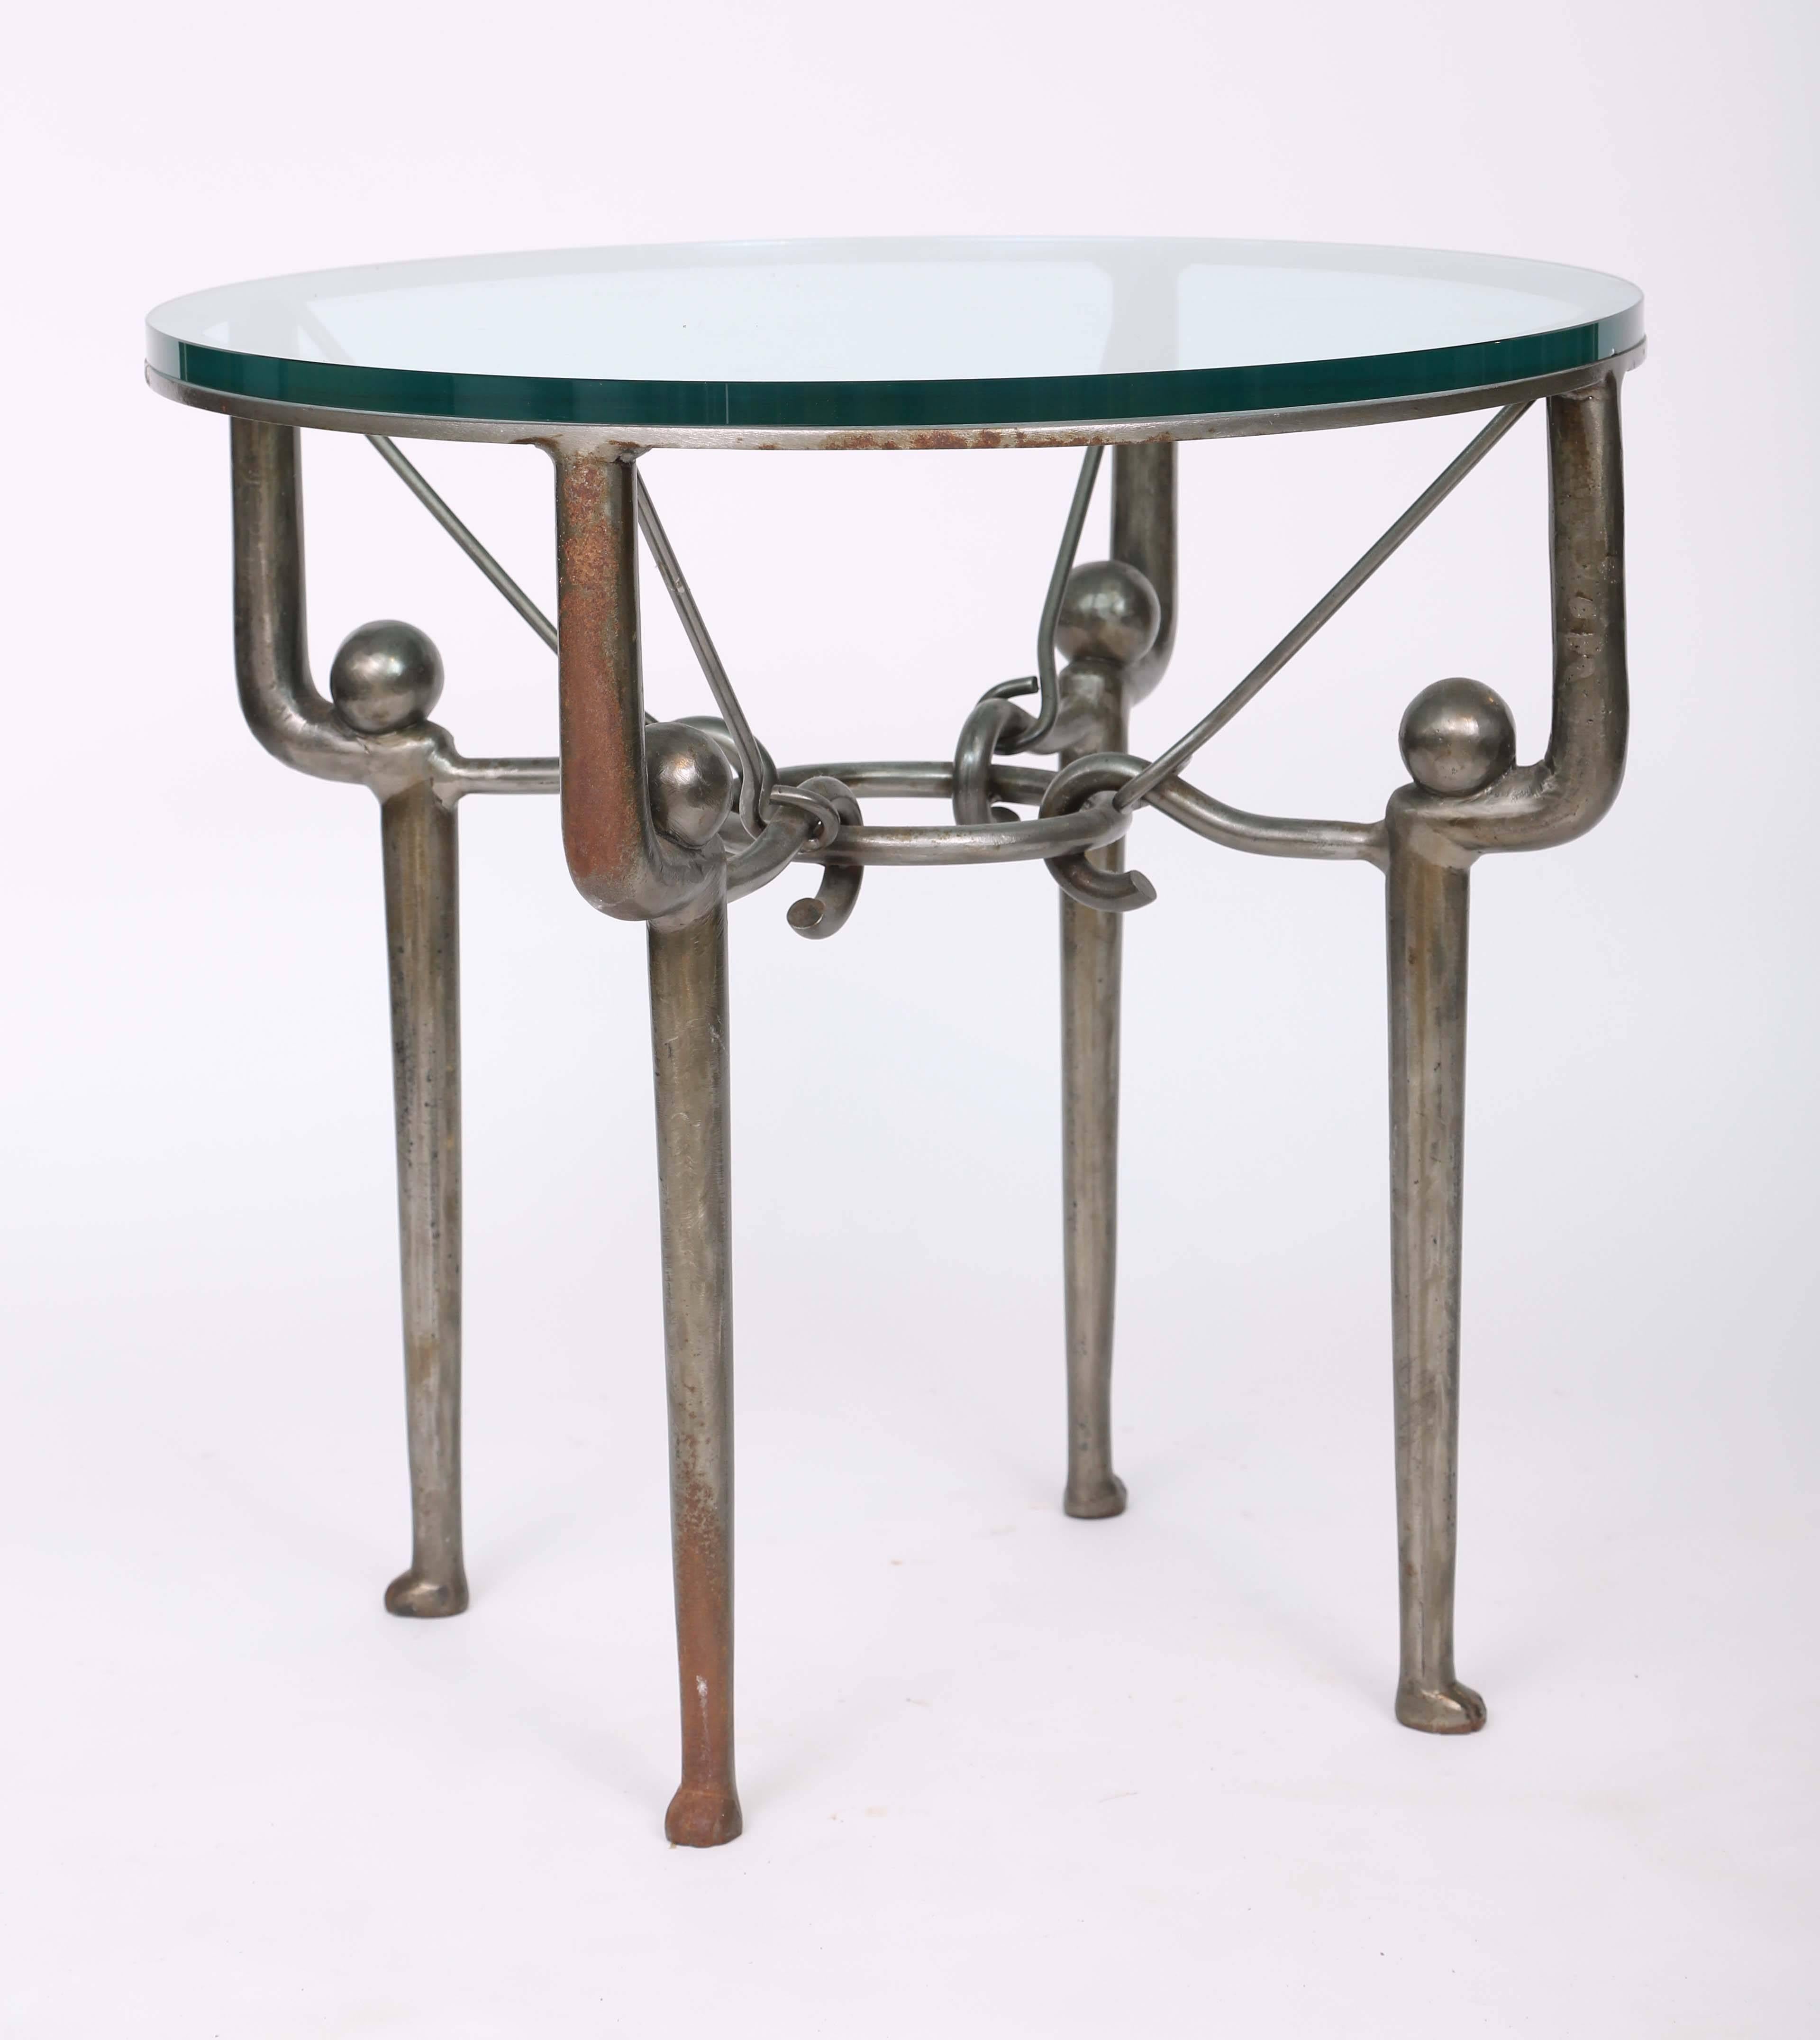 Pair of end tables, each having a round glass top, on heavy iron base with a finish of oxidized pewter-toned metal, raised on four hock-legs with ball finials, joined by hook stretchers. 

Stock ID: D6764.